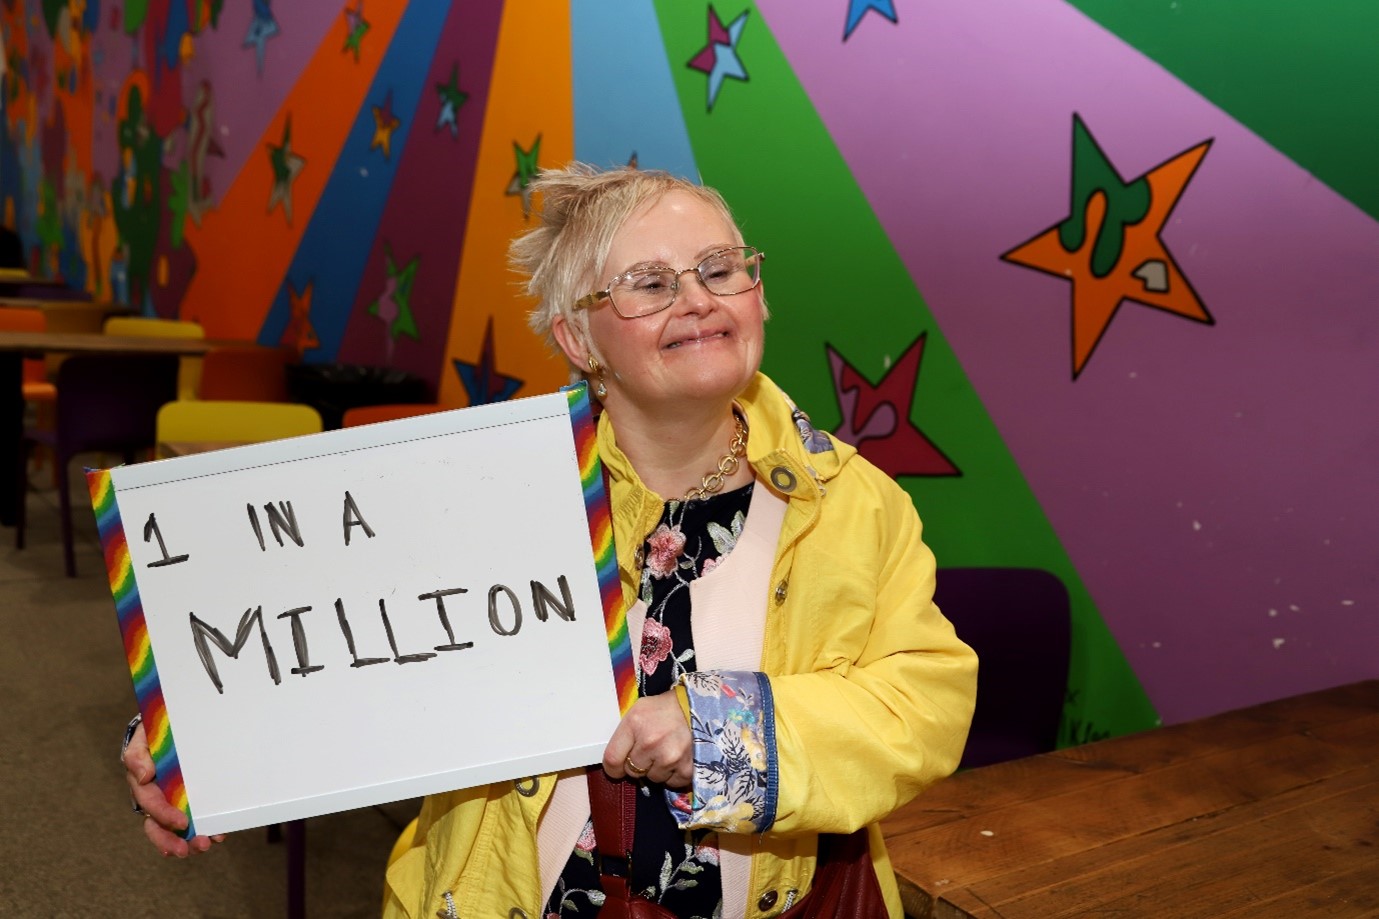 A photo of a woman in a yellow coat. She is wearing glasses and smiling. She is holding up a whiteboard with the words '1 in a Million' written on it in black ink.